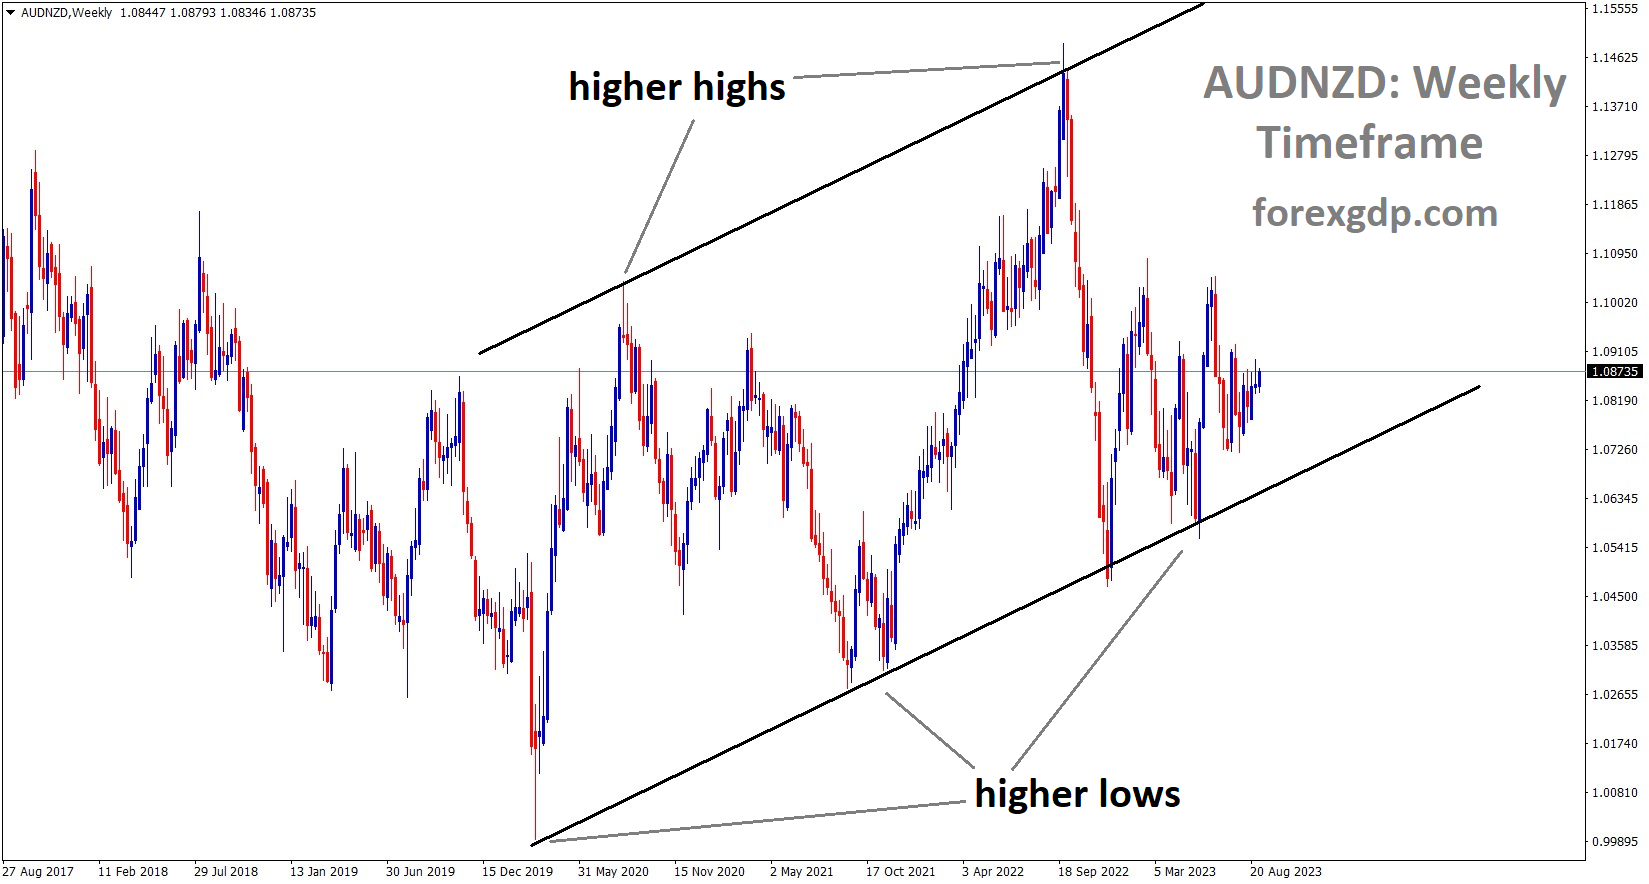 AUDNZD Weekly TF Analysis Market is moving an Ascending channel and the market has rebounded from the higher low area of the channel